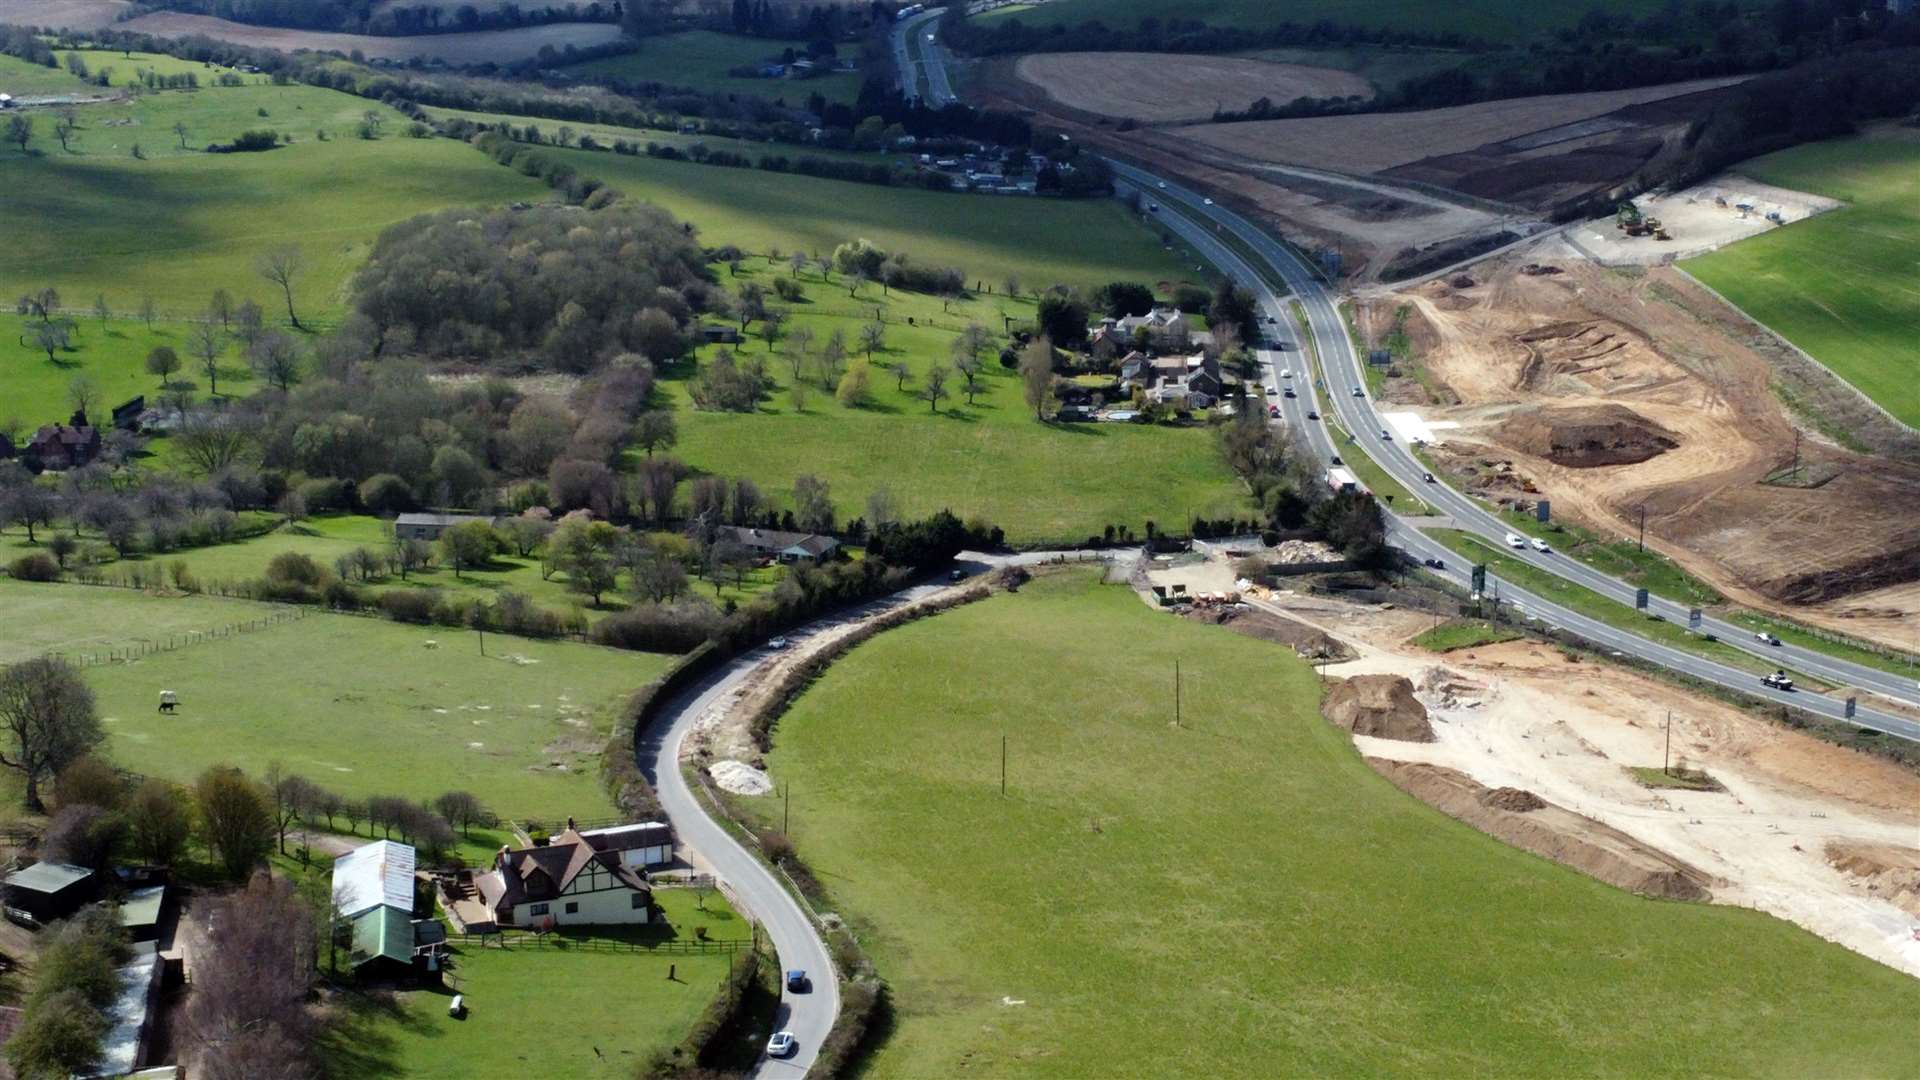 The roundabout as it looked in April, pictured from above the M2 looking towards Maidstone